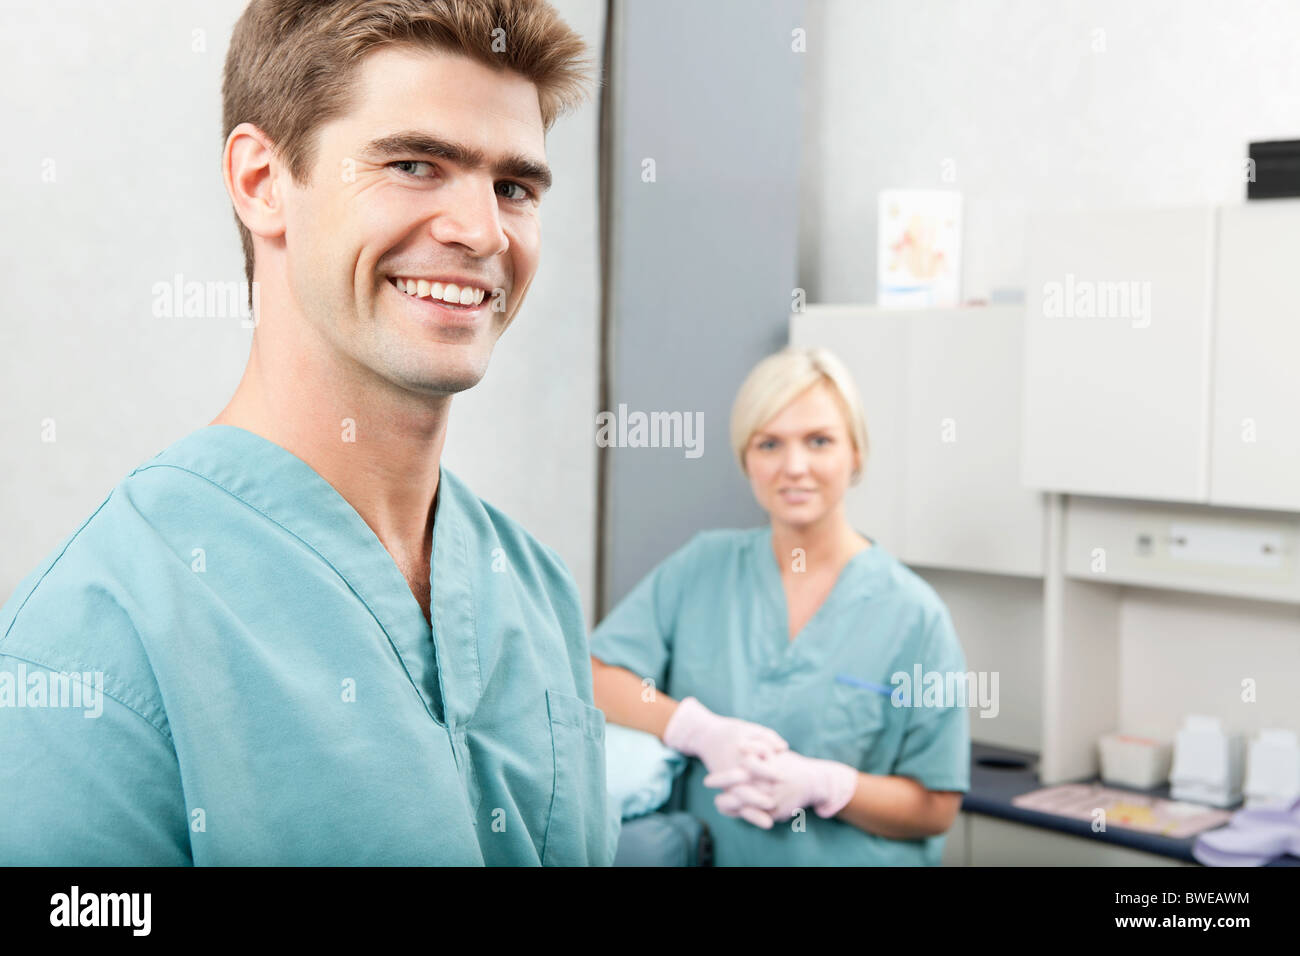 Portrait of male dentist with female assistant standing at dental clinic Stock Photo